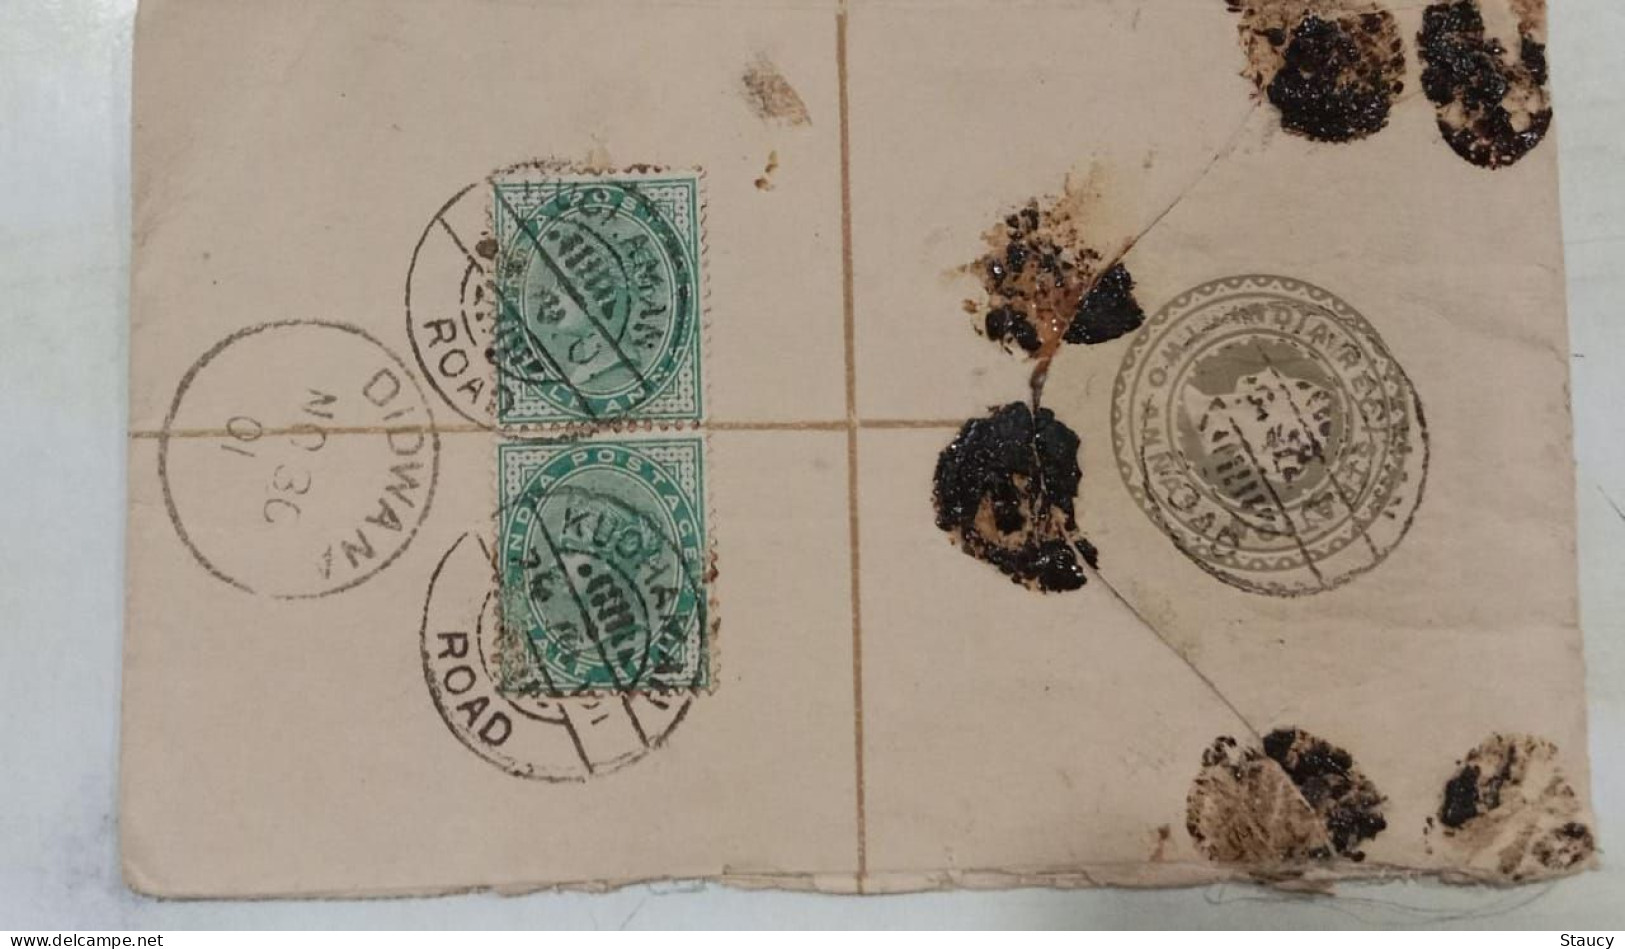 BRITISH INDIA 1901 QV 2 X 1/2a FRANKING On 2a QV Stationery Registered COVER, NICE CANC ON FRONT & BACK As Per Scan - Jaipur